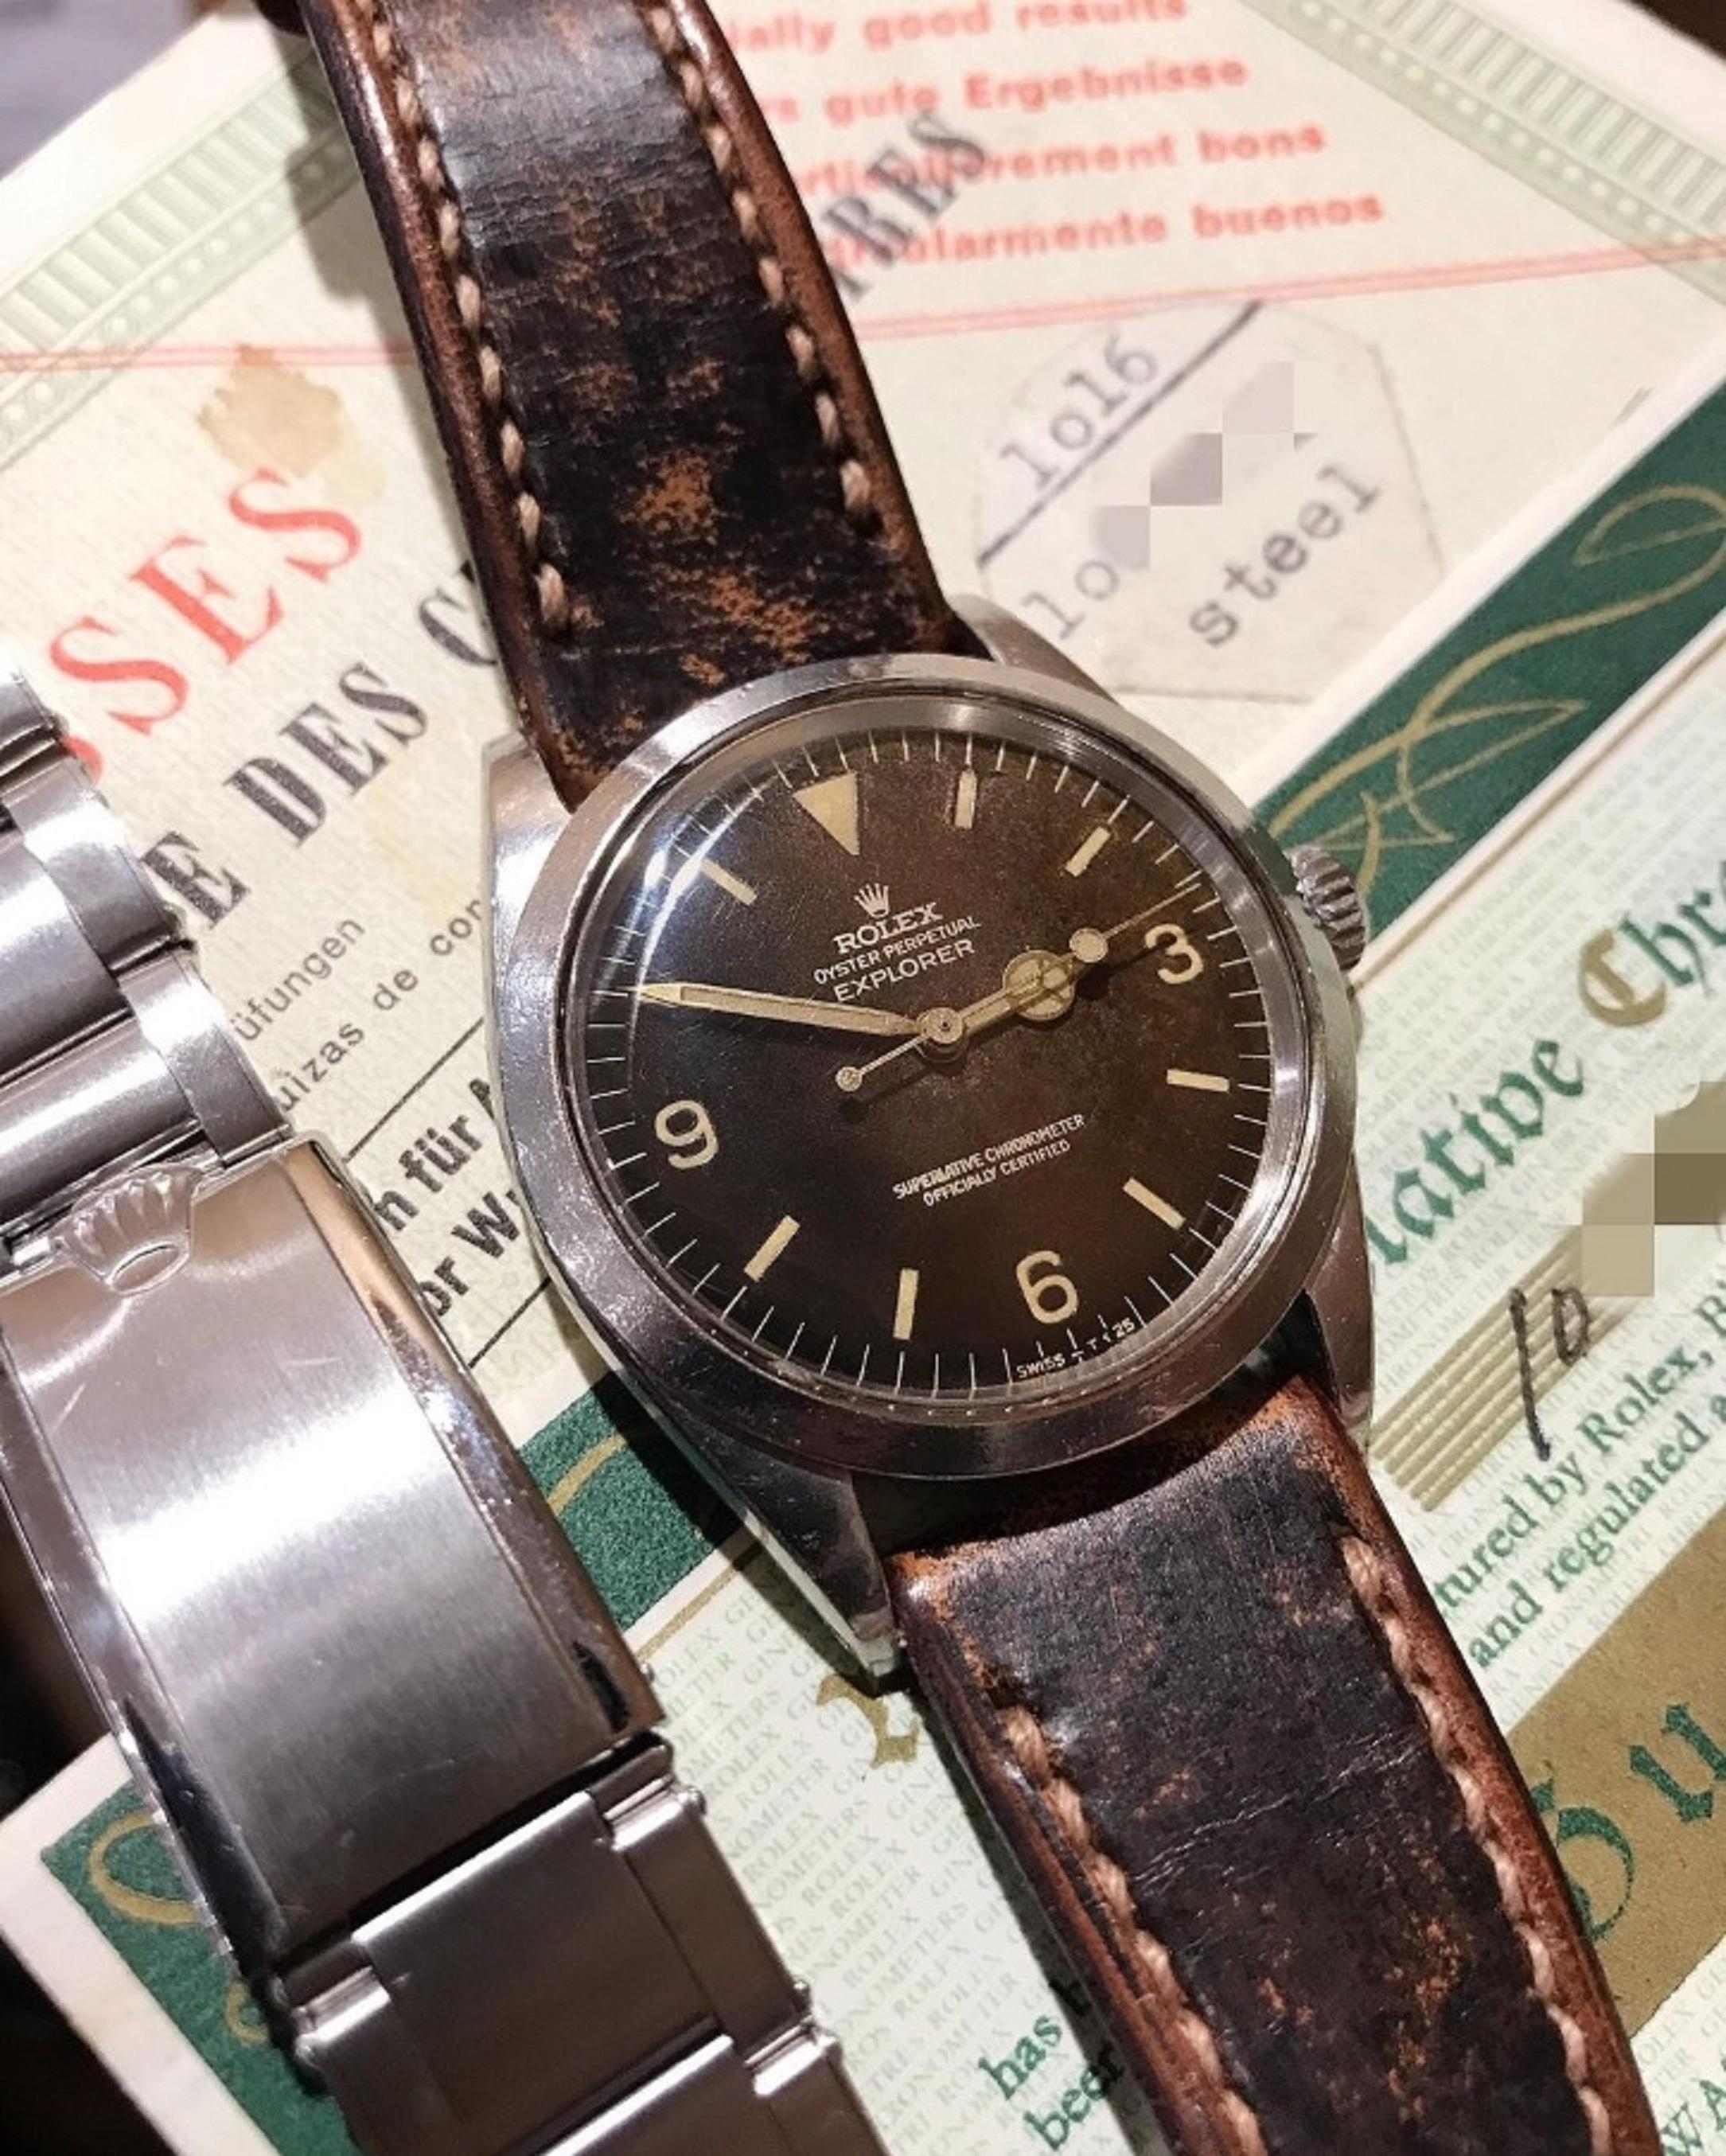 Brand: Vintage Rolex
Model: 1016
Year: 1964
Serial number: 10xxxxx
Reference: OT1932

The tropical dial on a Explorer 1016 is an exceptionally rare find, adding an extraordinary touch to this vintage timepiece. Over time, certain dials develop a